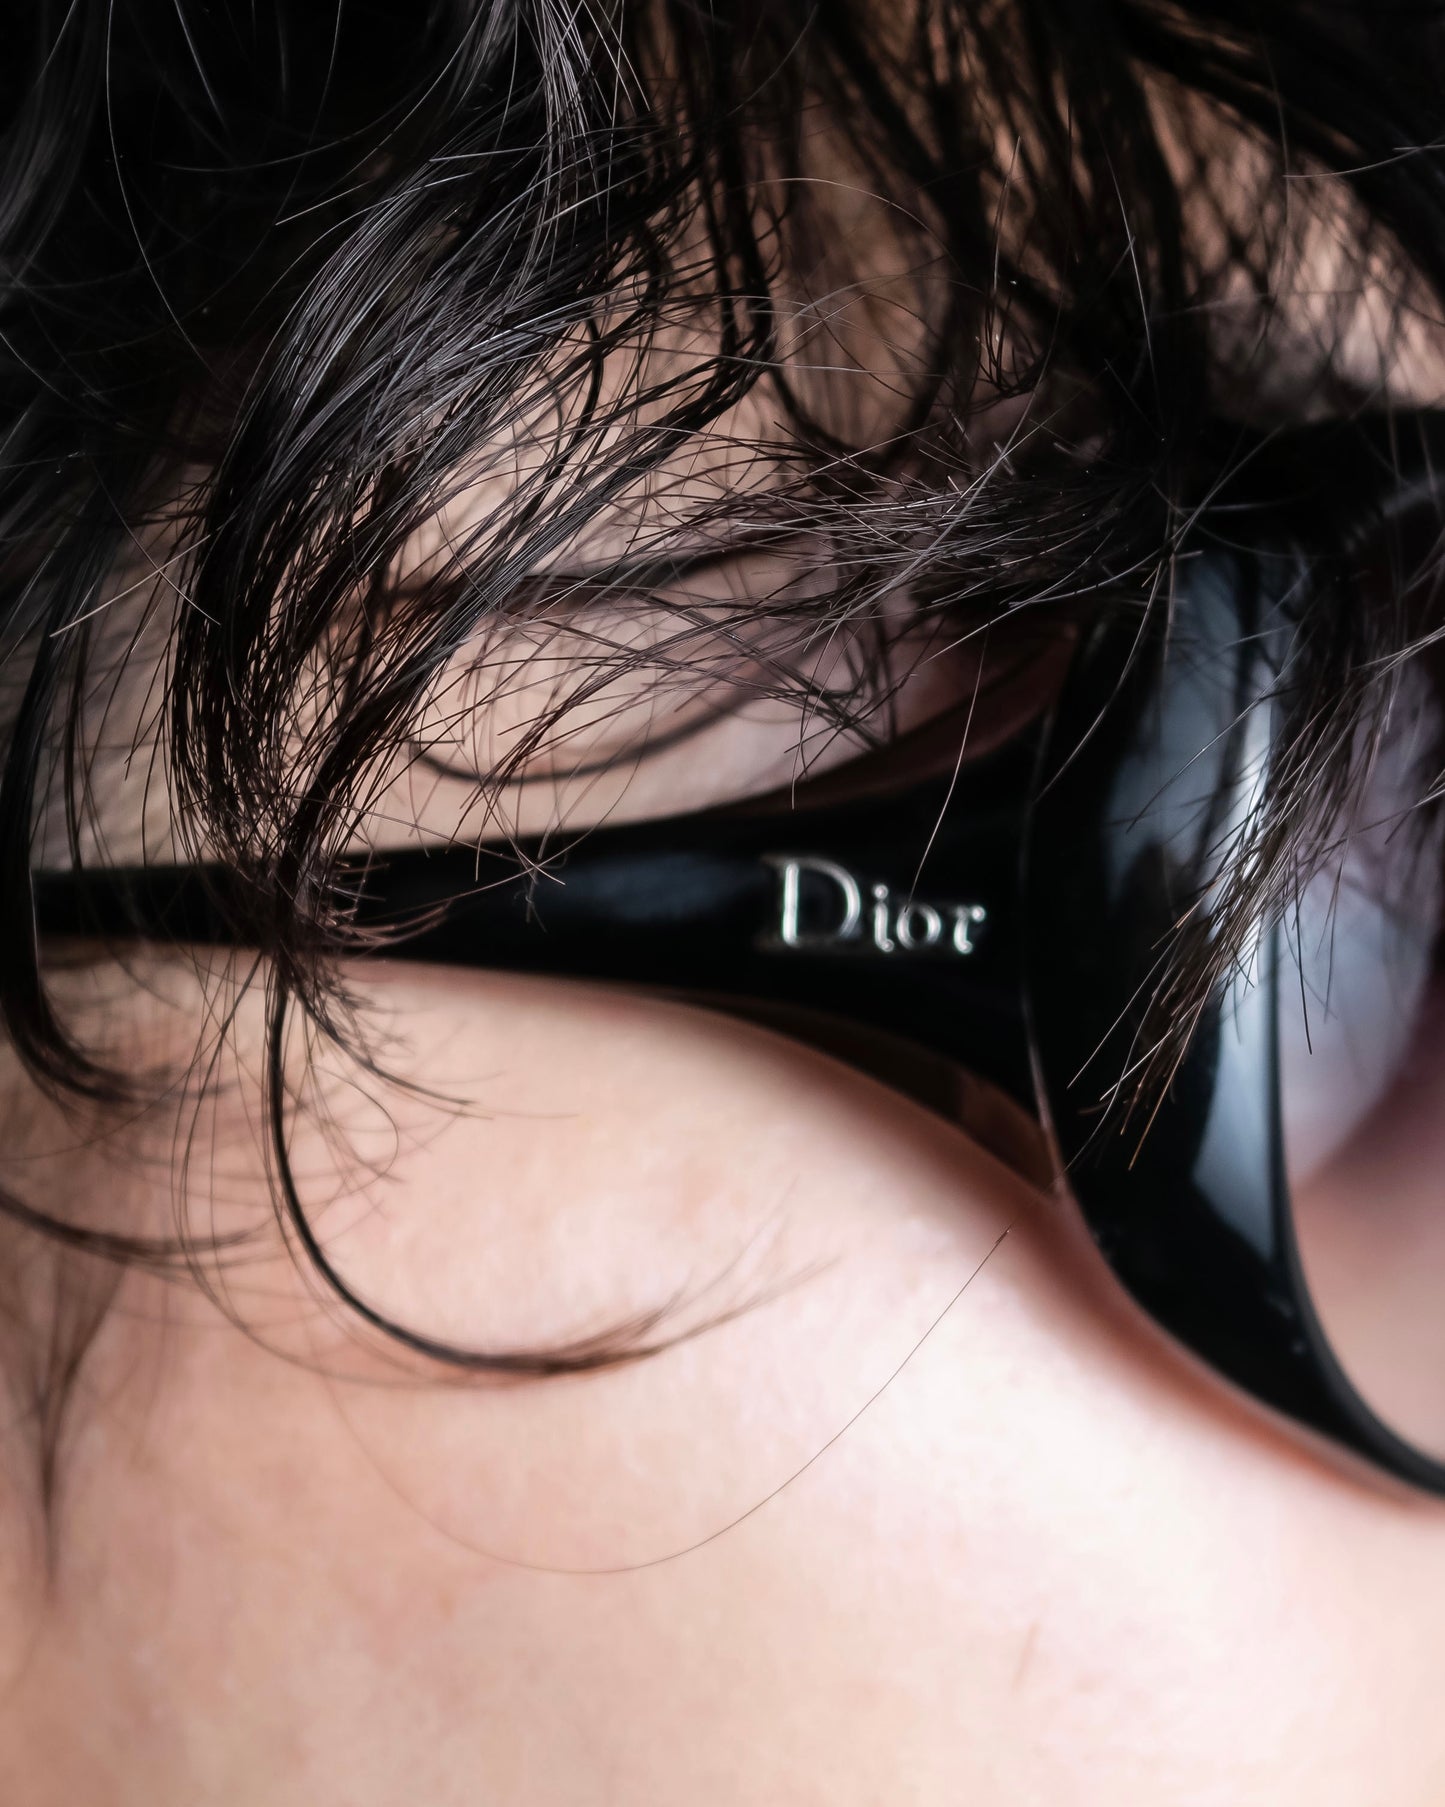 “Dior” Butterfly flame curved surface sunglasses